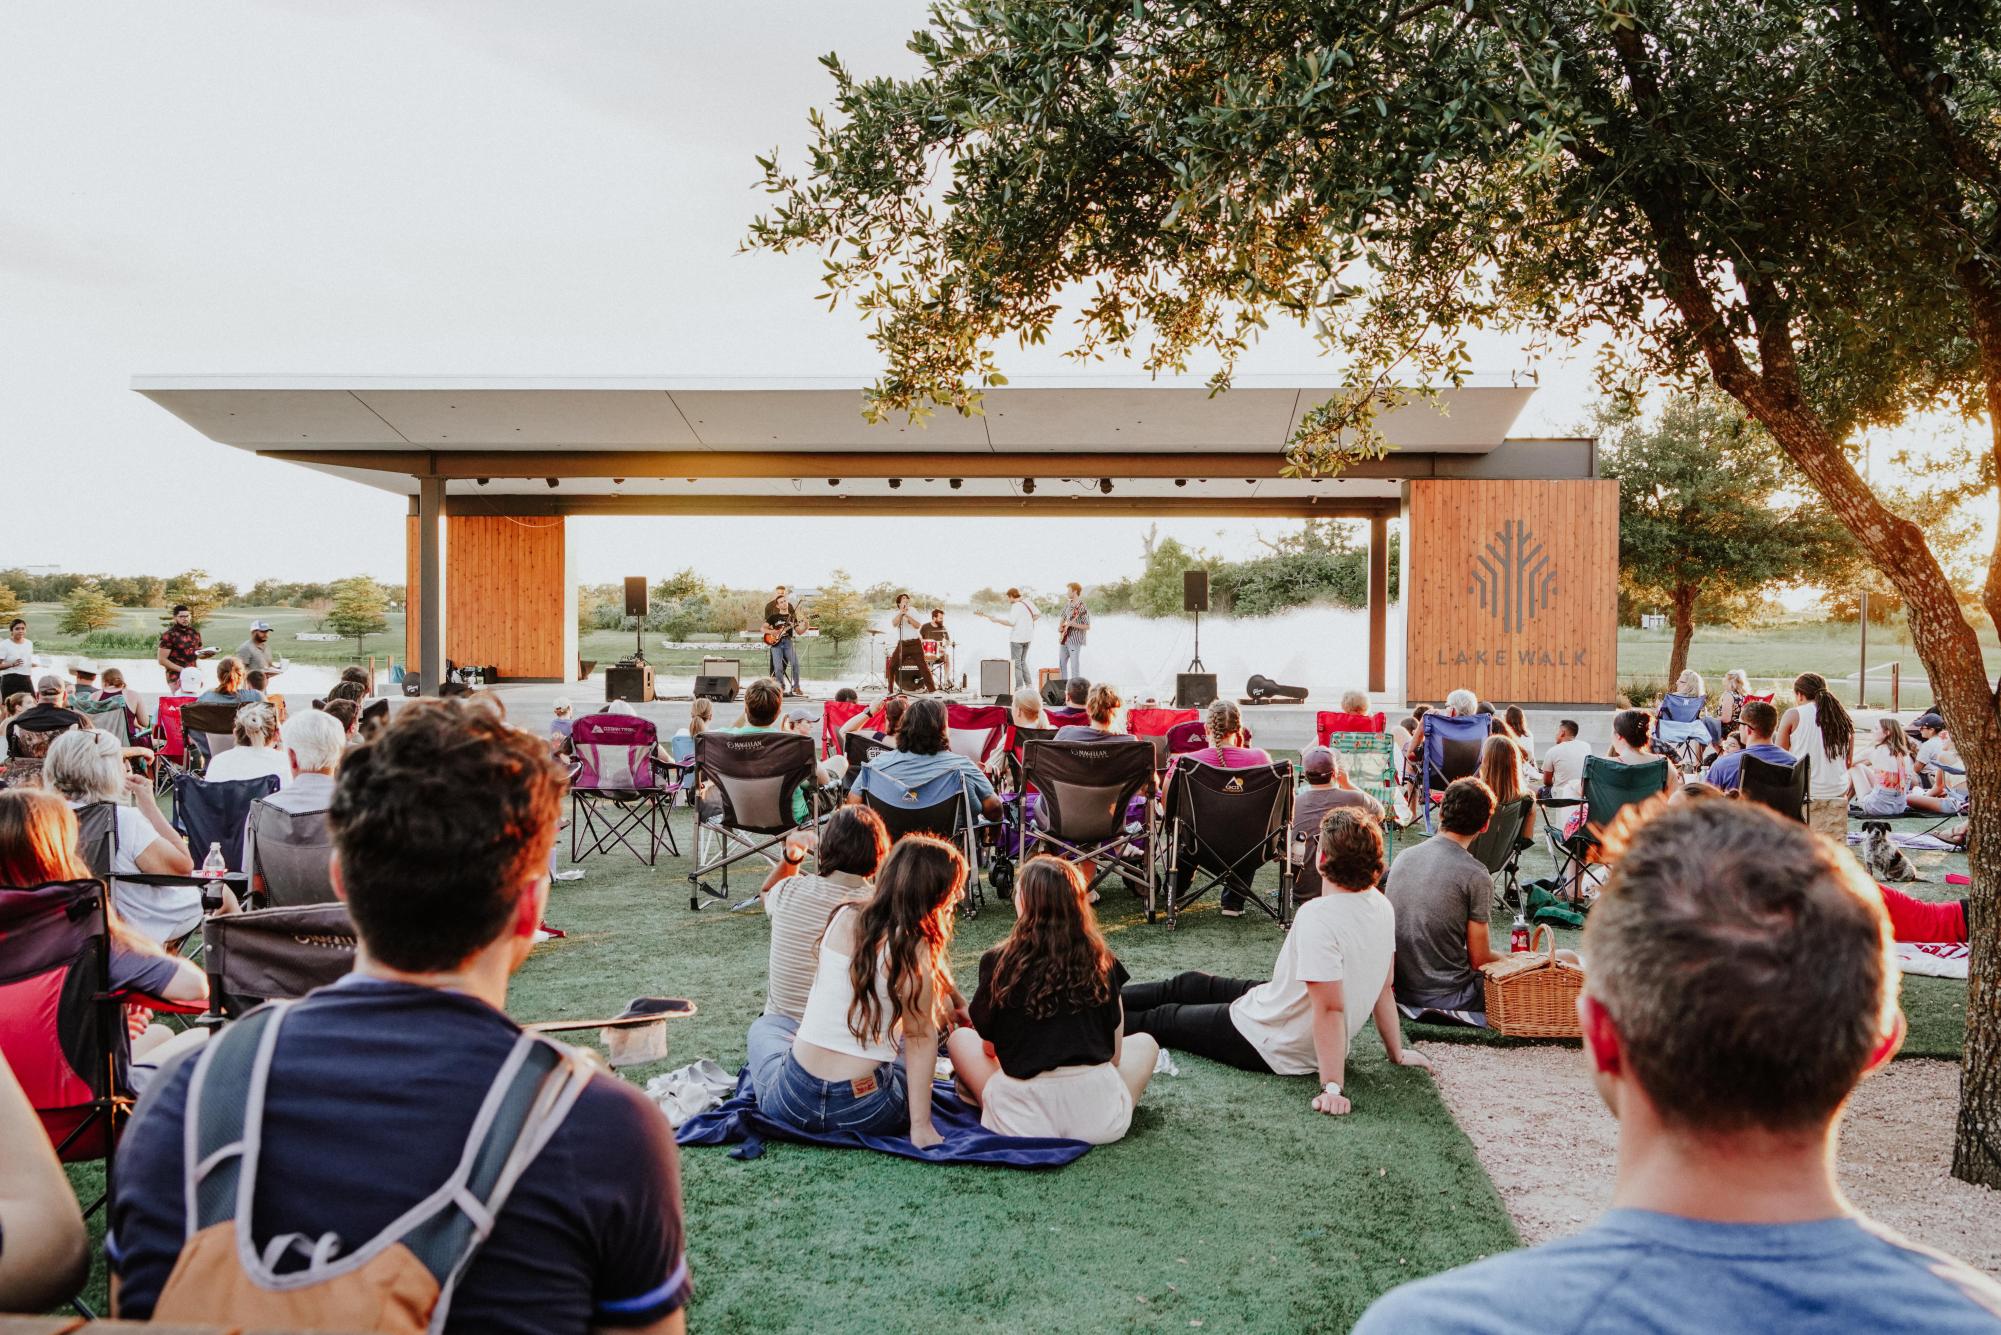 Eats & Beats at Lake Walk features live music and food trucks for the perfect outdoor concert.